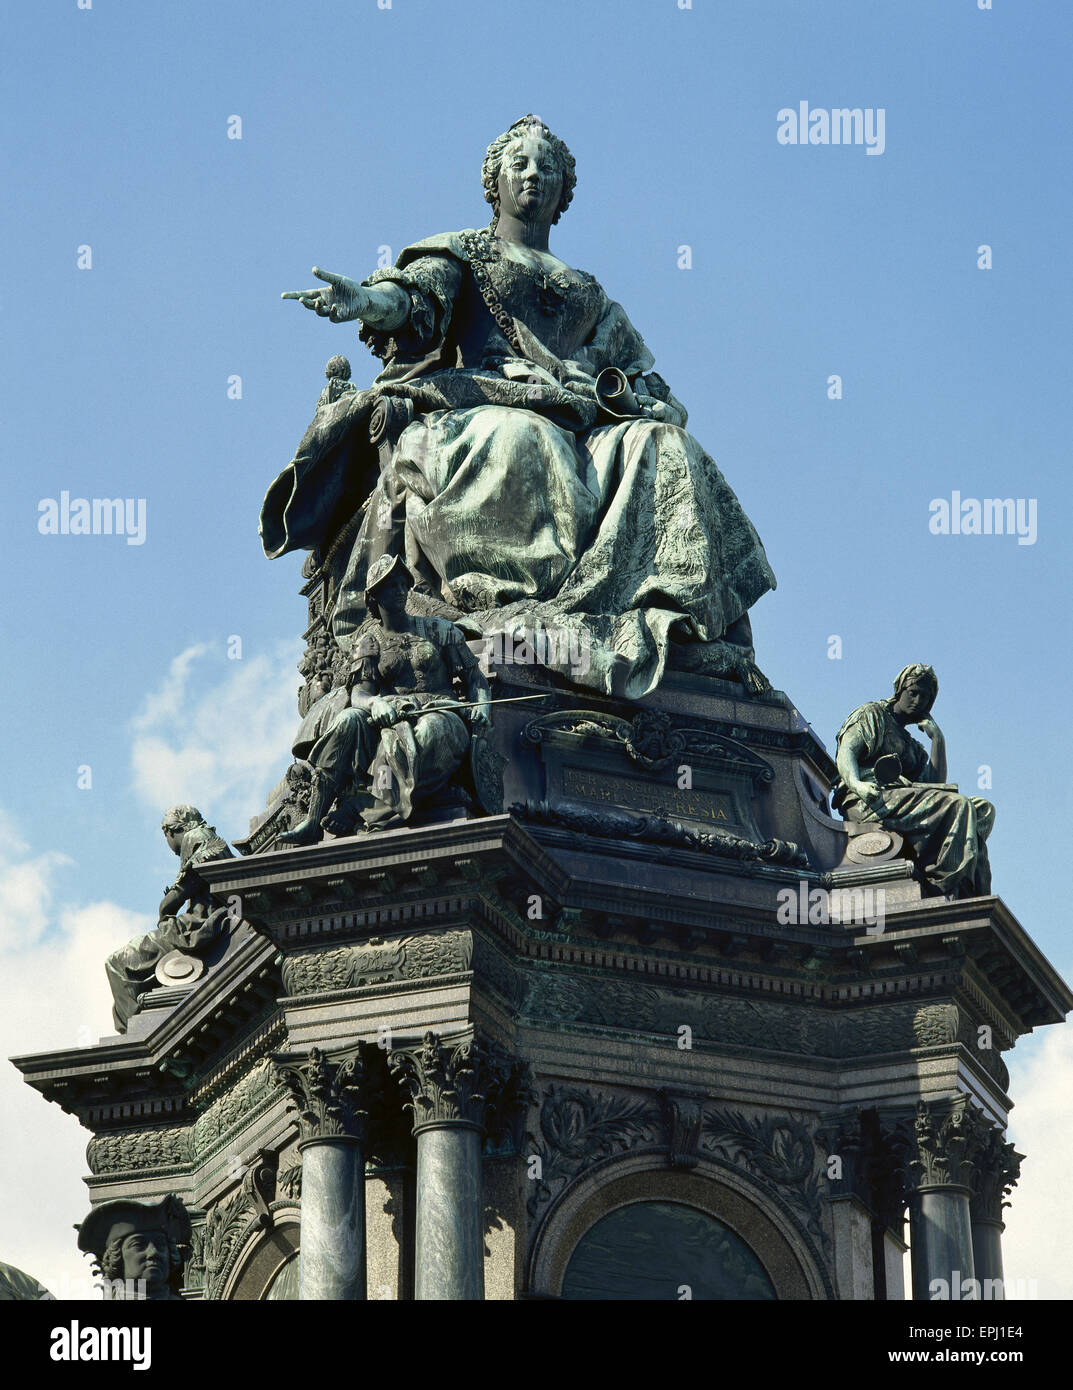 Maria Theresa (1717-1780). Empress of the Holy Roman Empire. Statue of the Maria Theresia monument. By German sculptor Kaspar von Zumbusch, 1888.  Vienna. Austria. Stock Photo